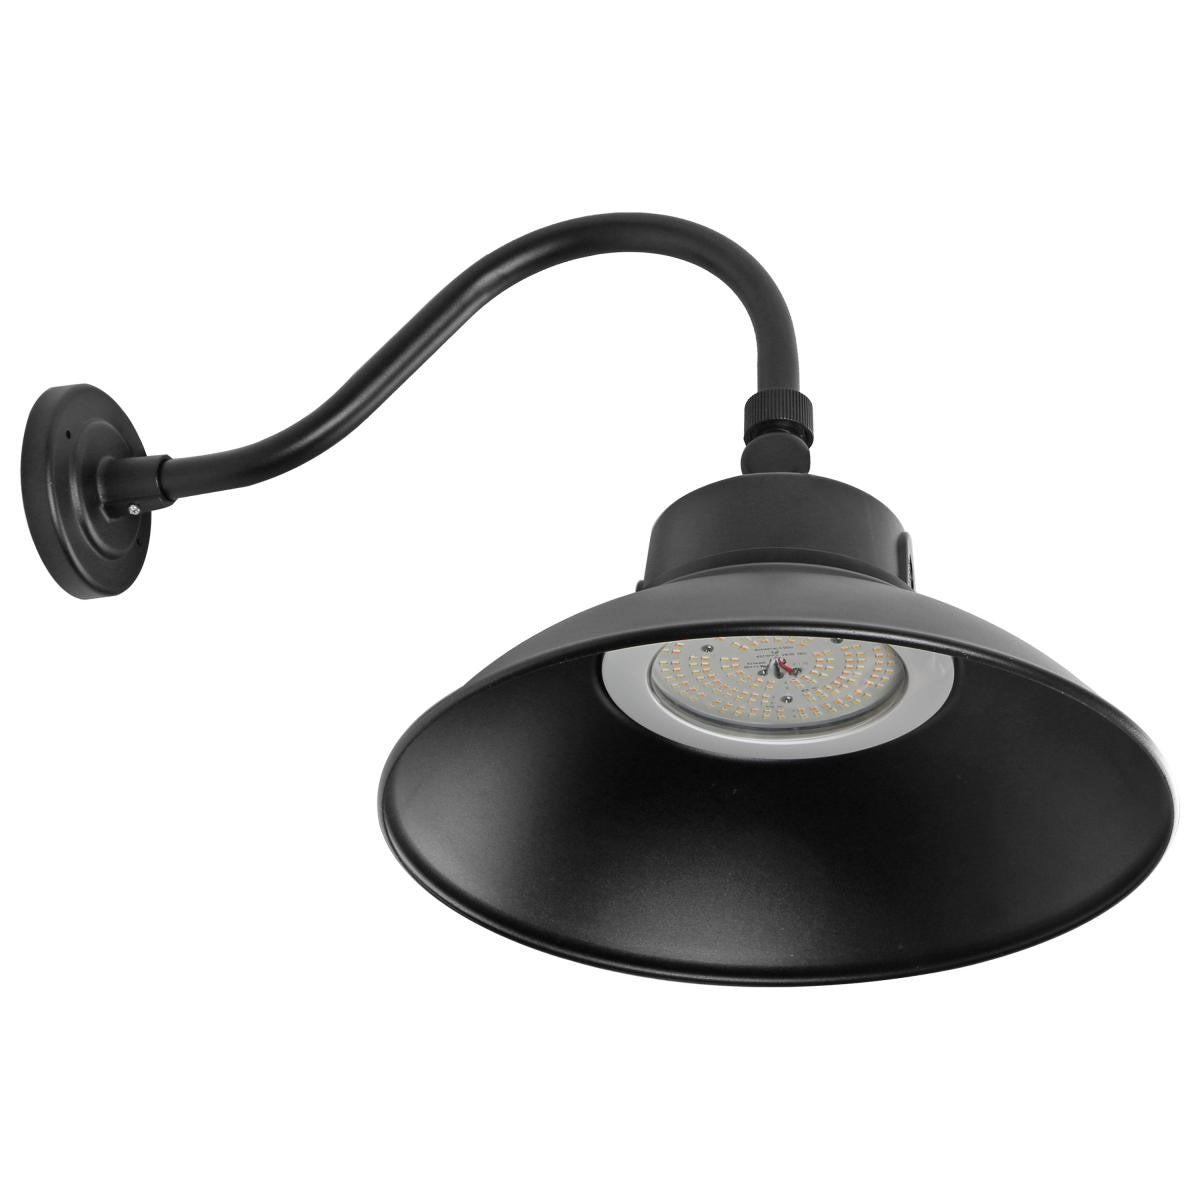 A black gooseneck LED light fixture with a curved arm, providing customizable, efficient illumination. Perfect for adding rustic style to your space.